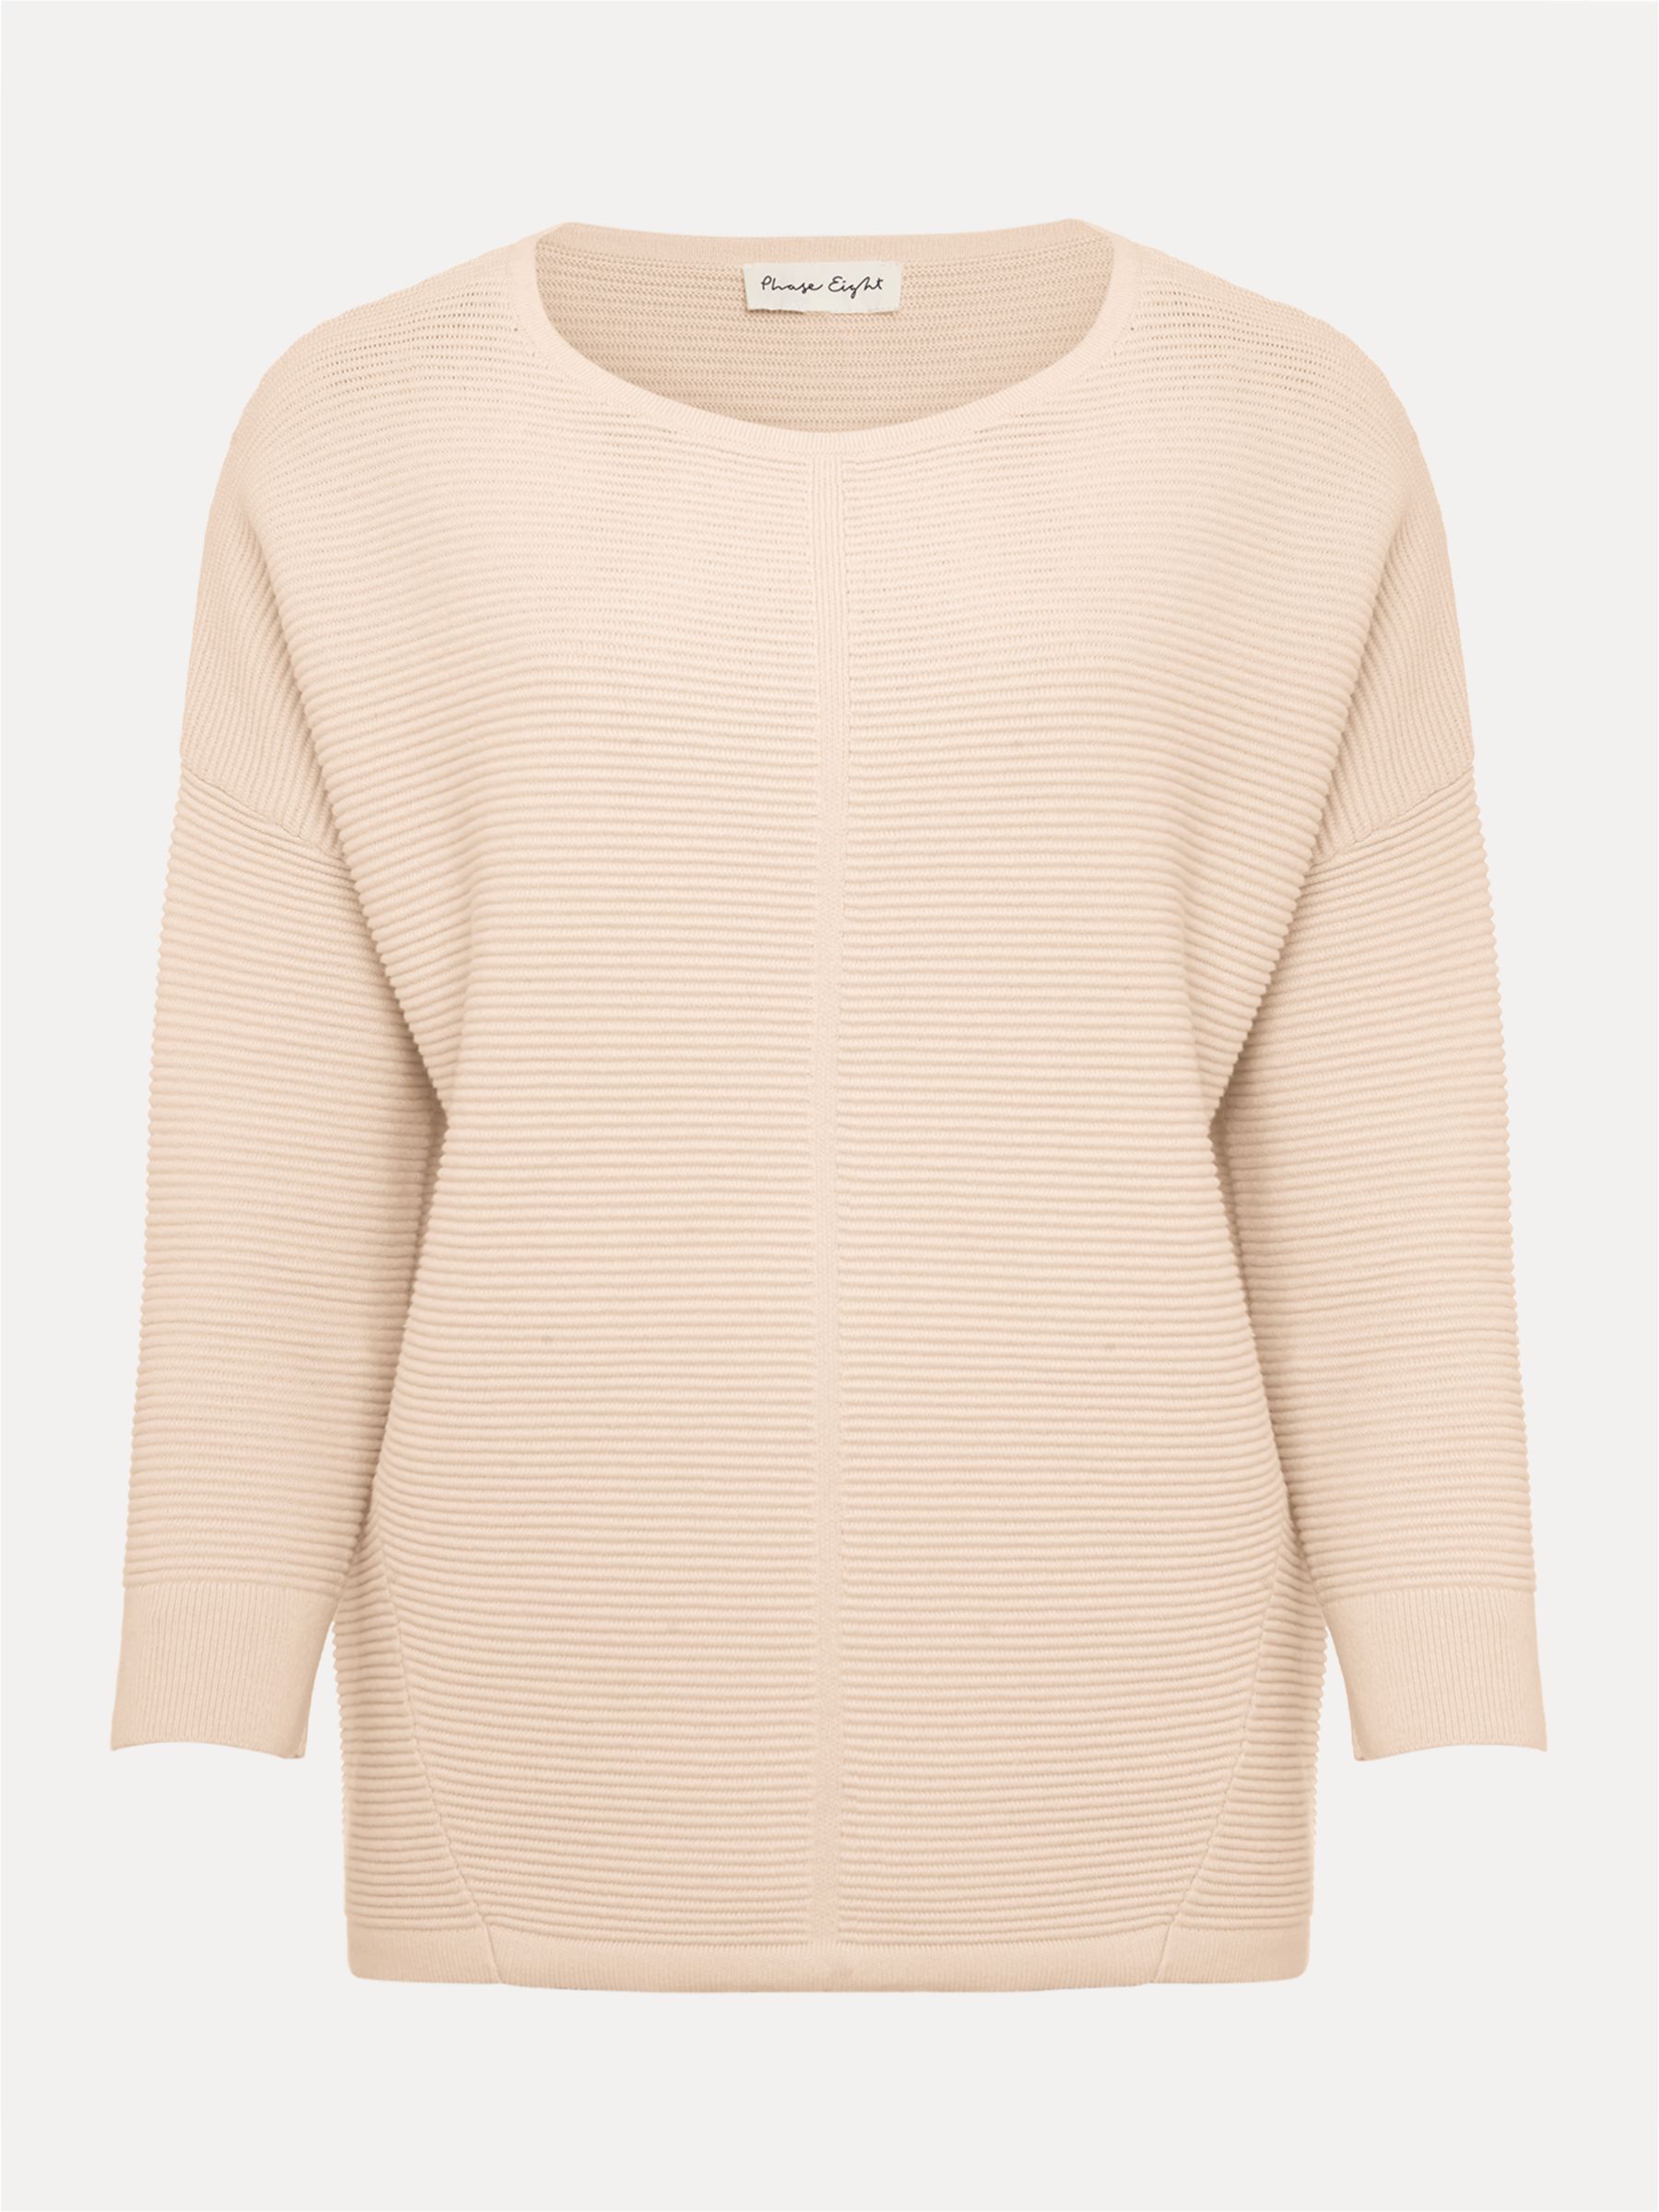 Buy Phase Eight Nellie Jumper Online at johnlewis.com